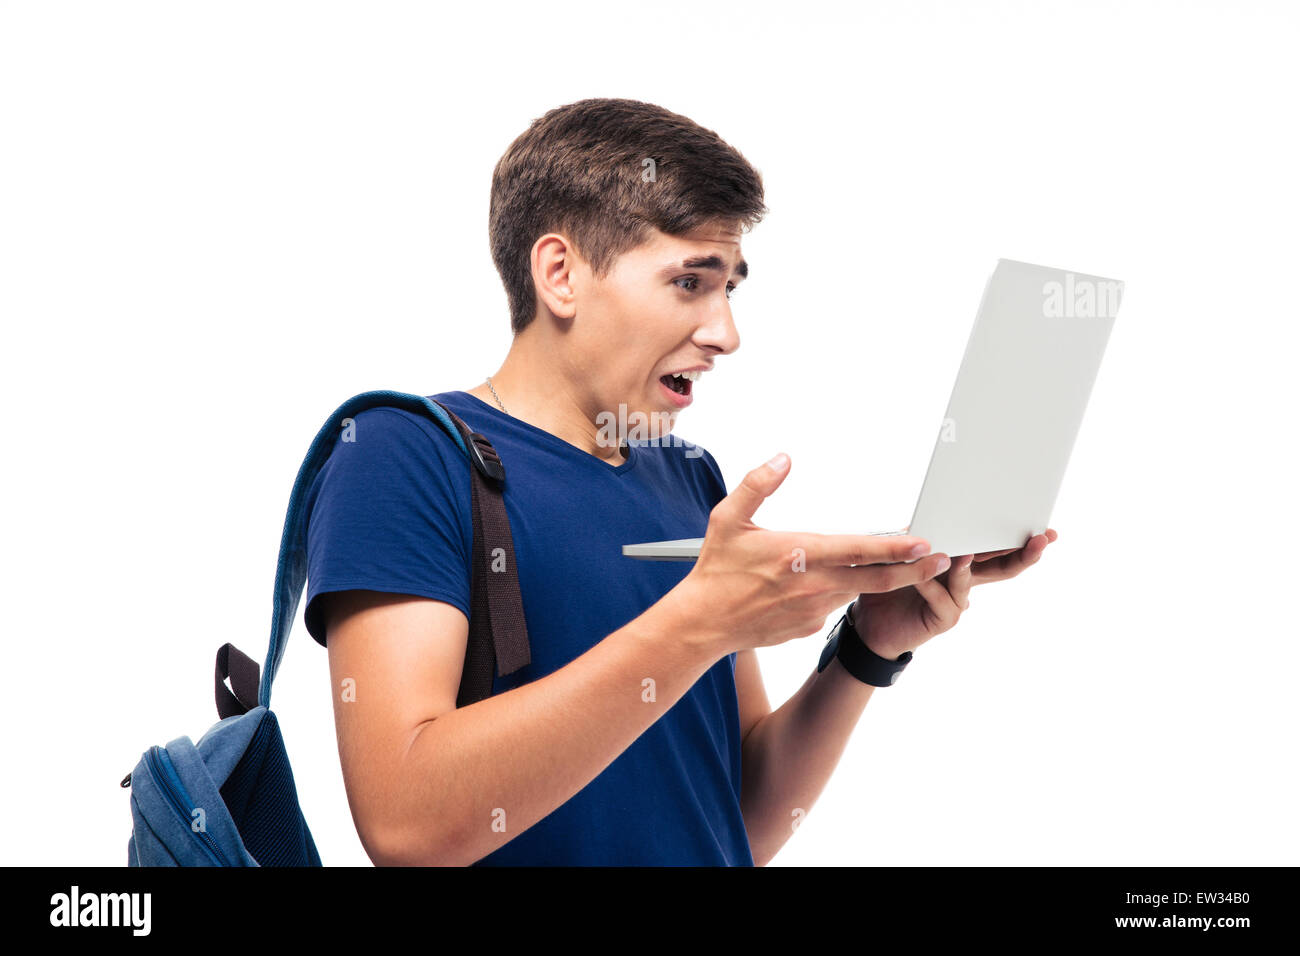 Male student with disgusted emotion holding laptop isolated on a white background Stock Photo